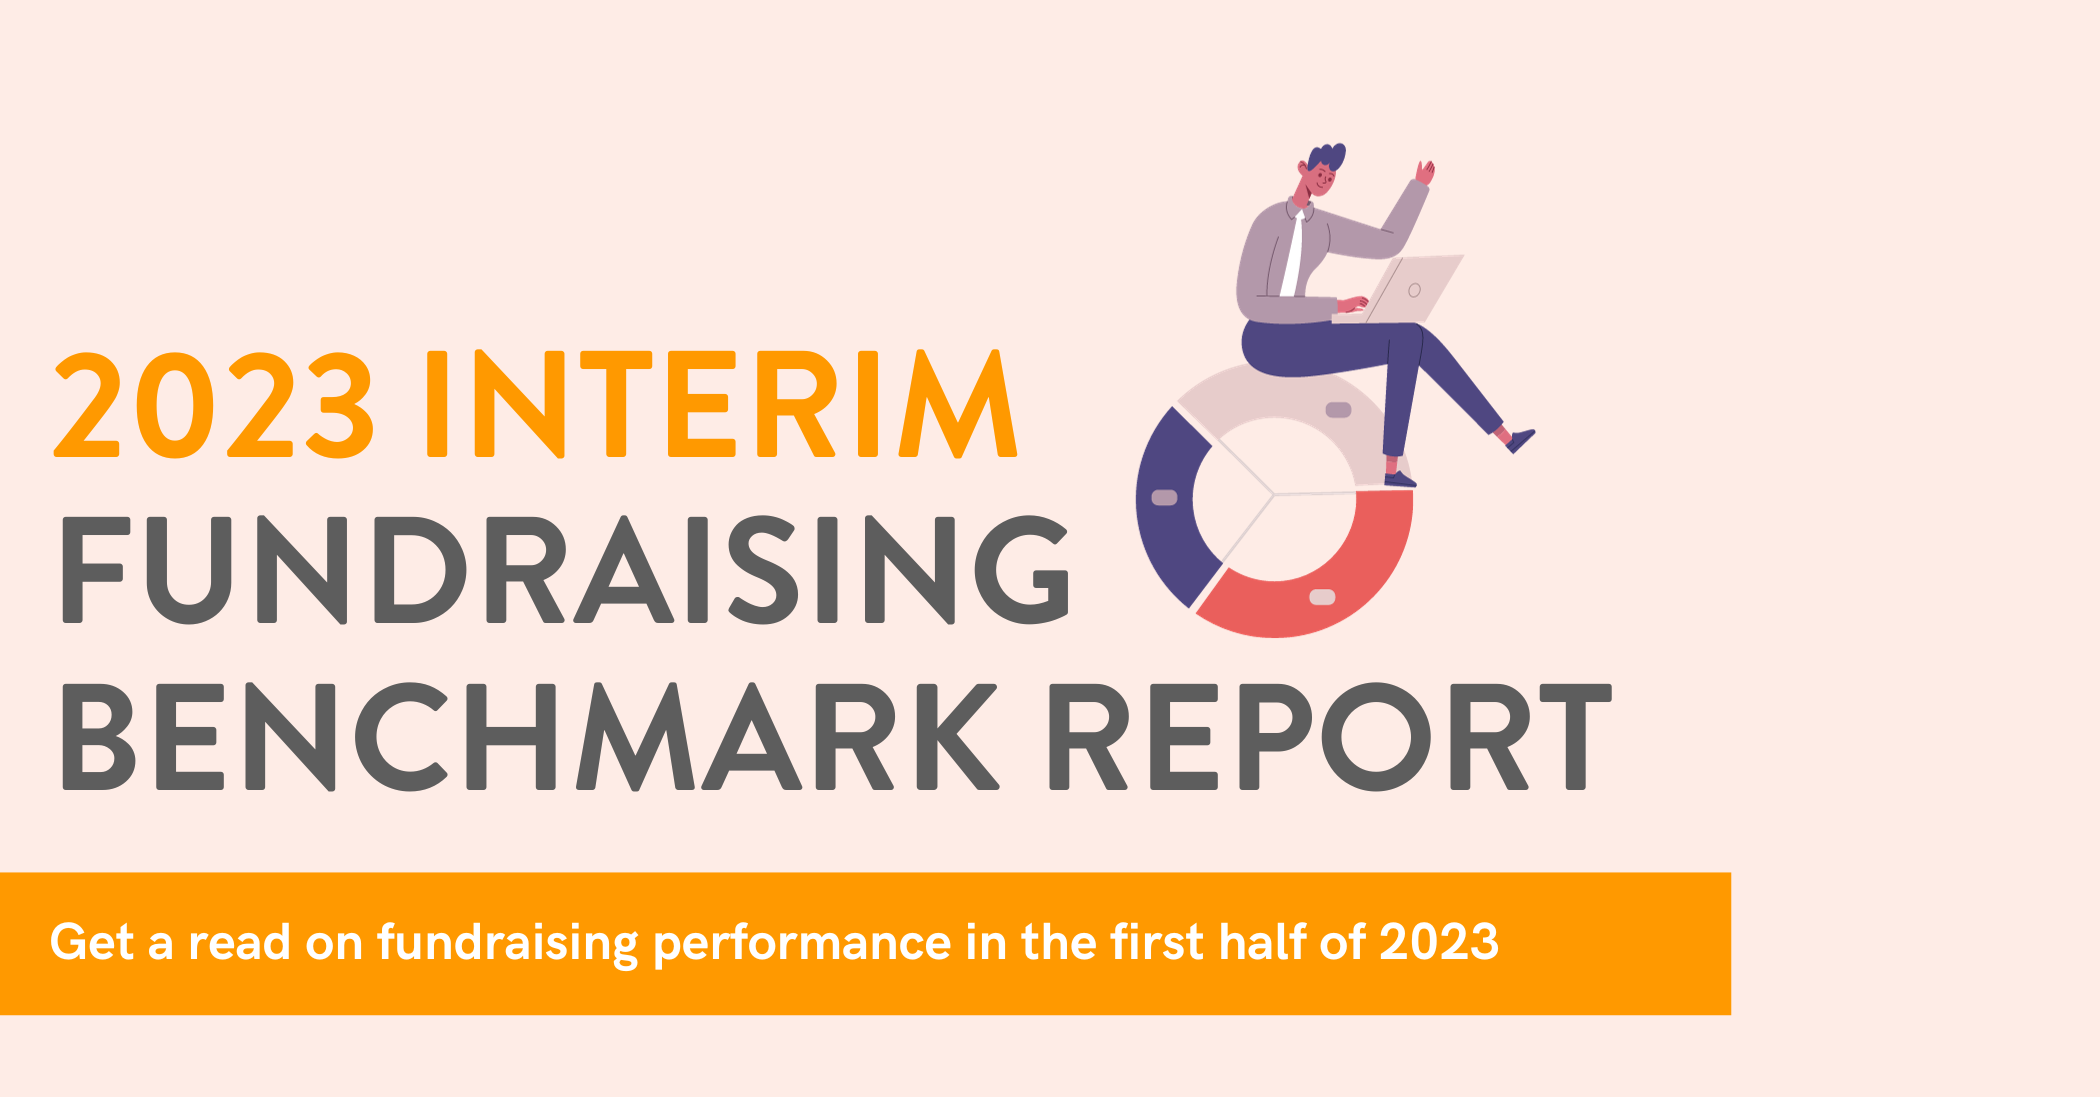 Get Key Insights About Fundraising in 2023 with our New Benchmark Report